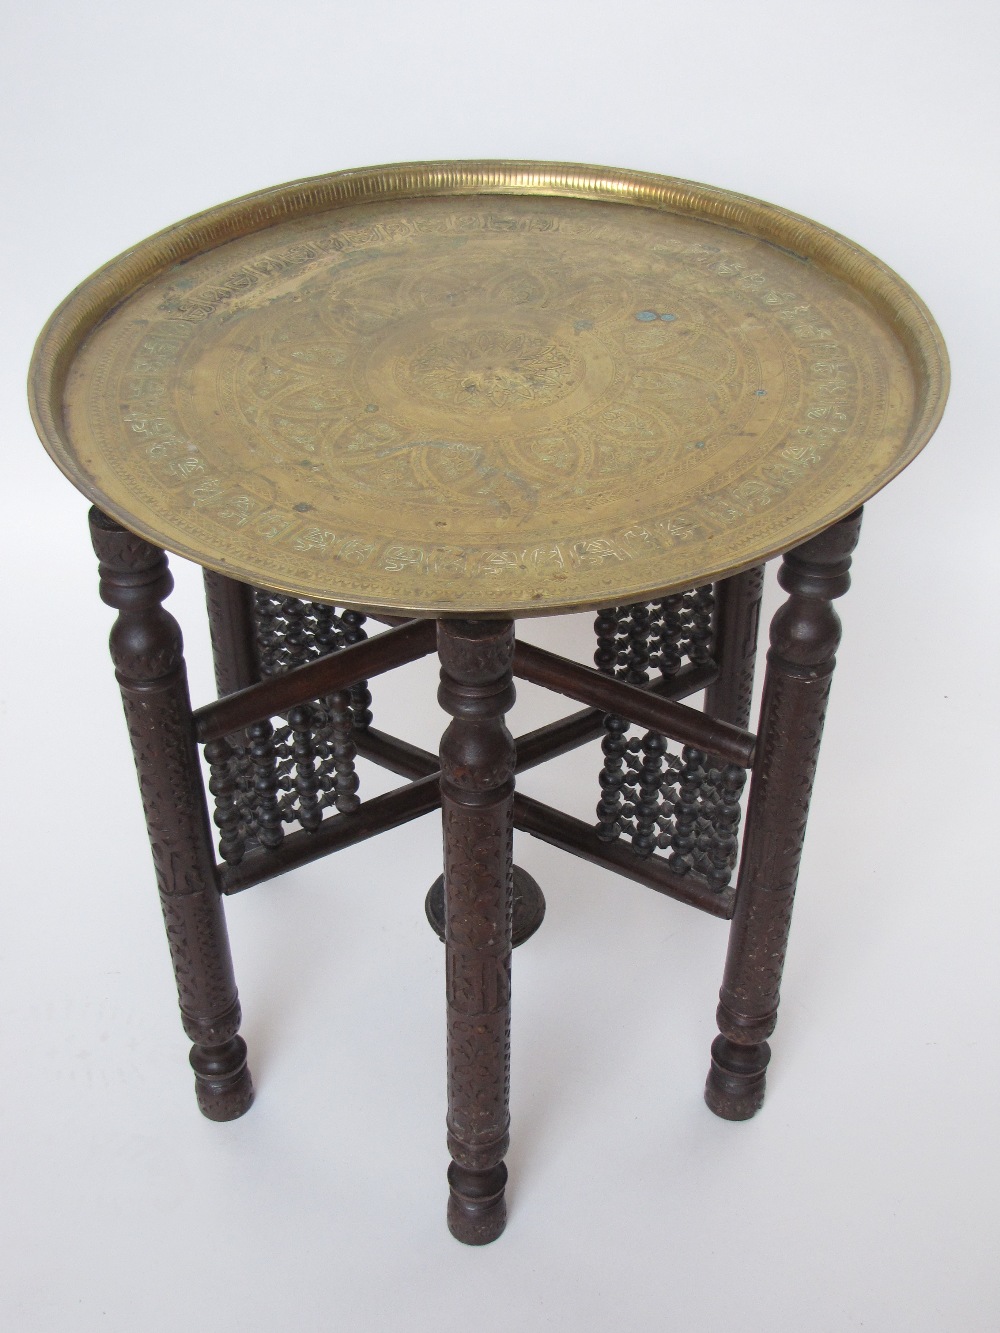 An Indian brass topped tea table on folding stand.